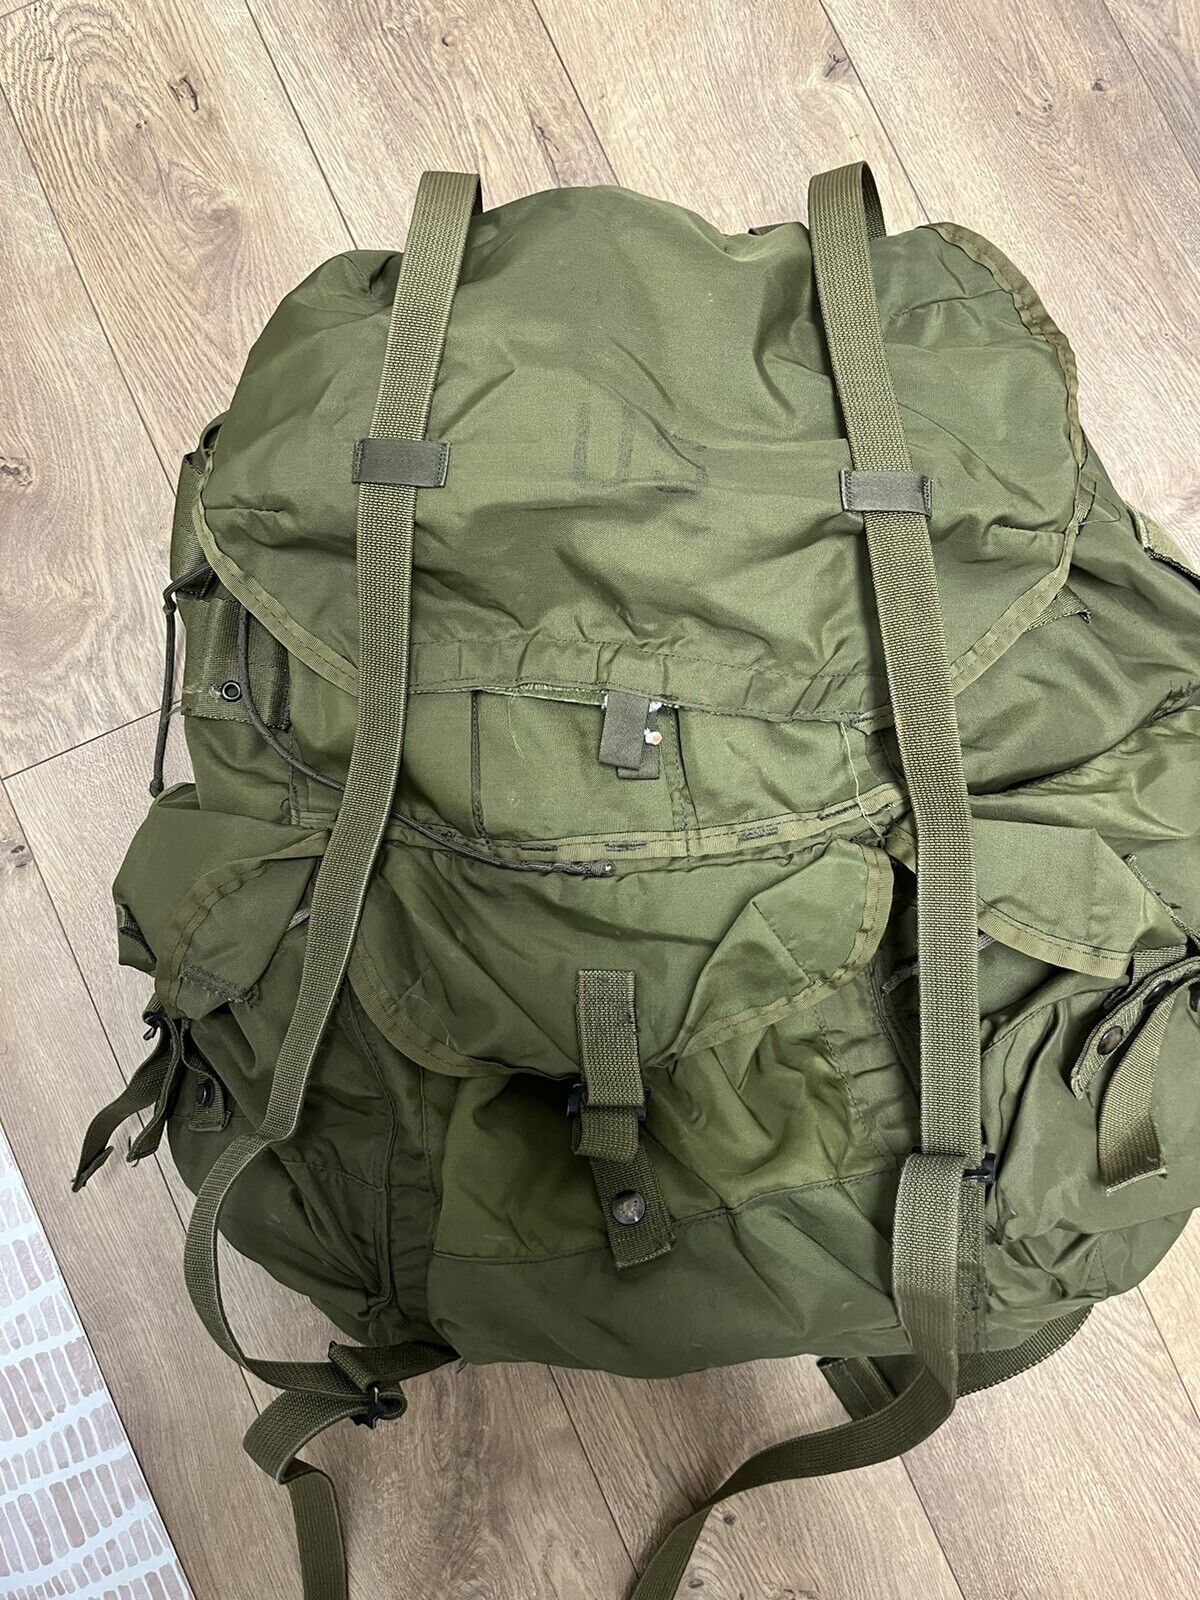 ALICE Combat Field Pack Backpack With Frame Rucksack Large LC-1 OD Green